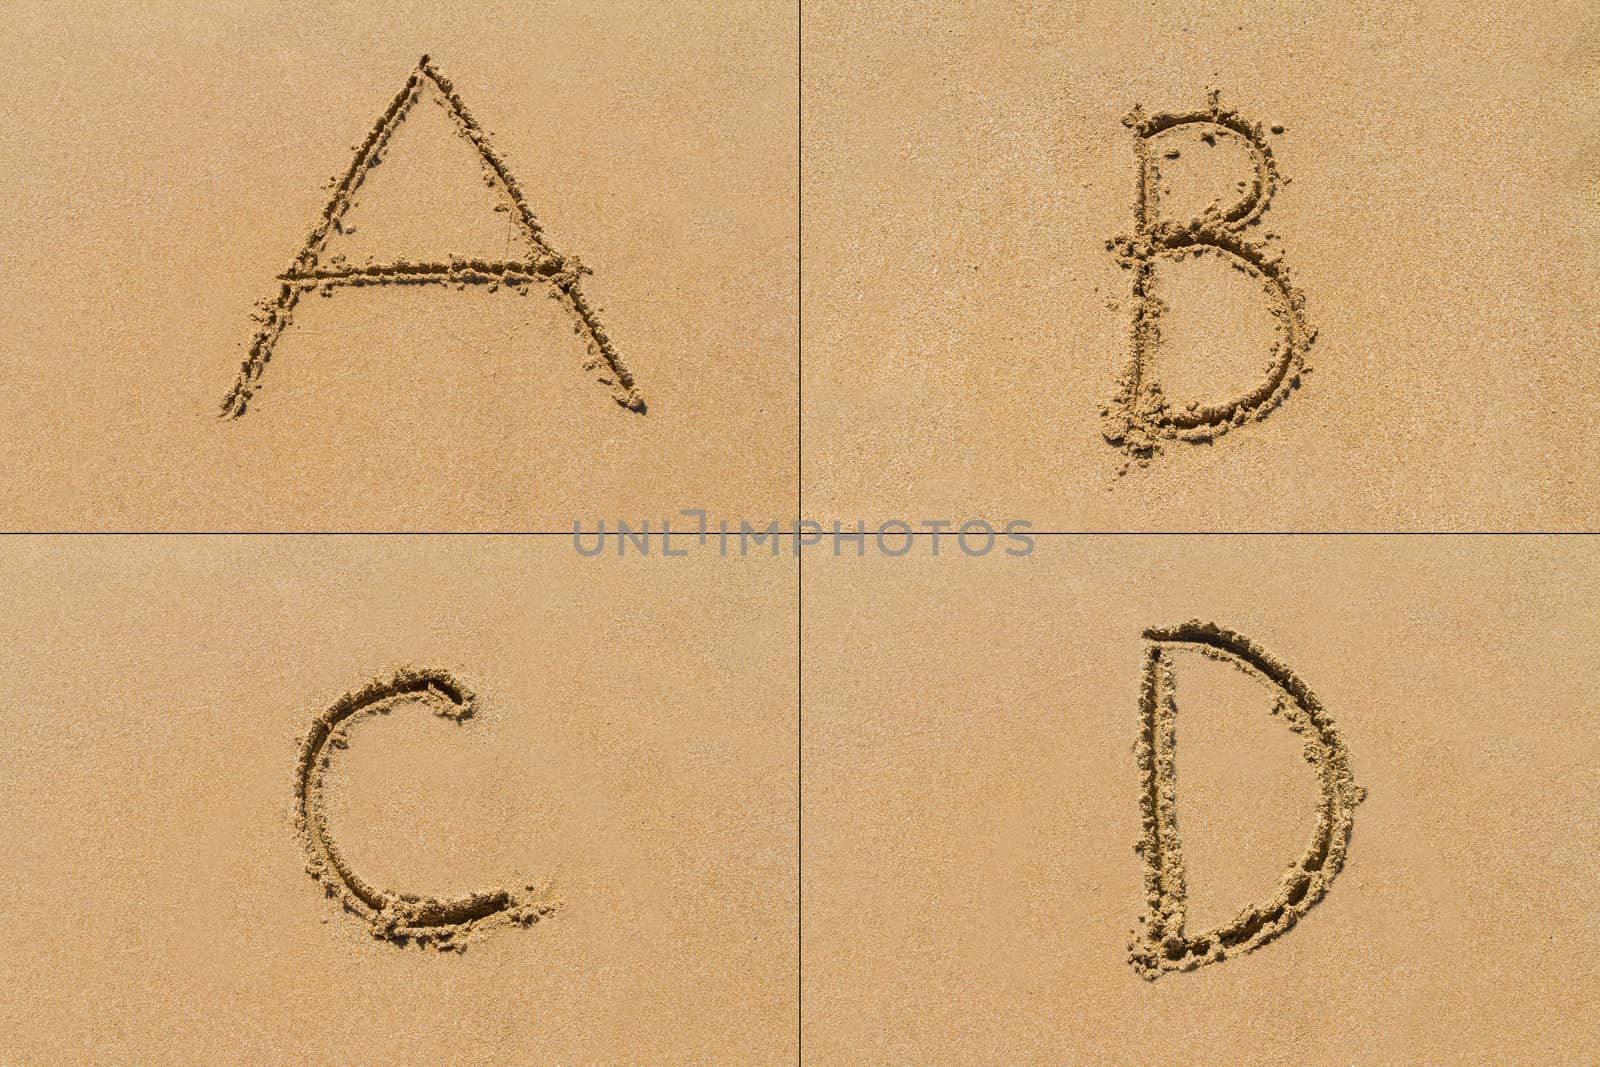 Conceptual set of A B C D letter of the alphabet written on sand with upper case.